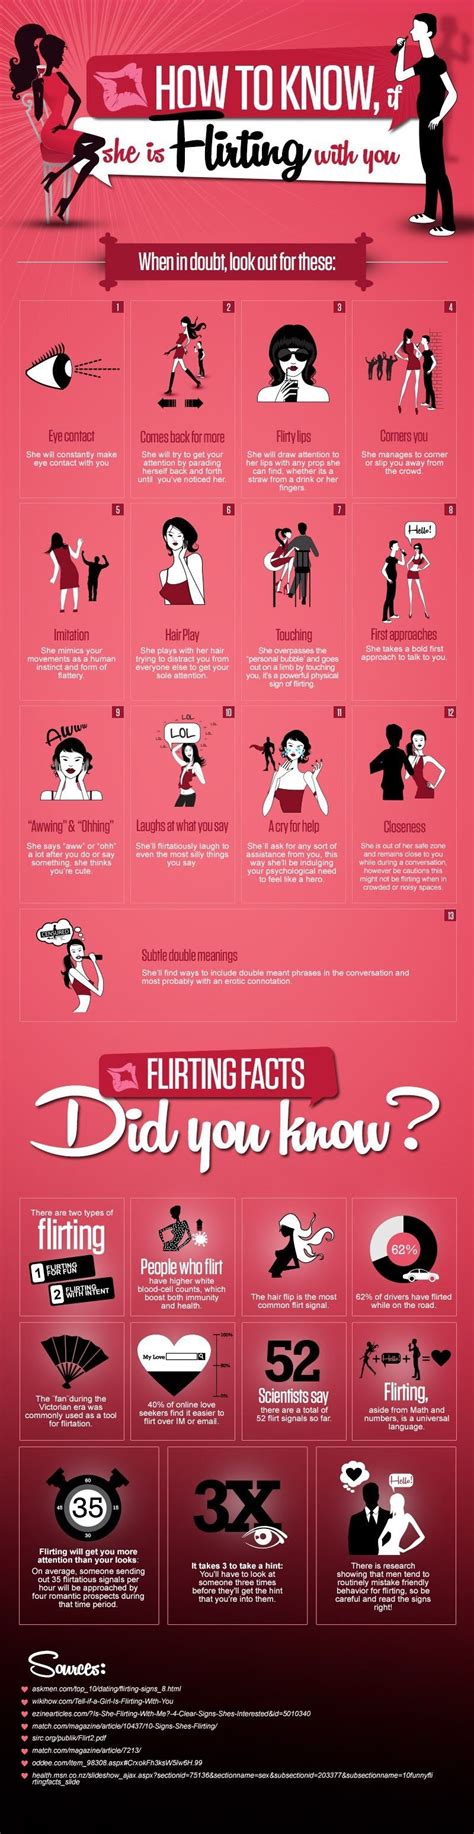 13 signs if she is flirting with you [infographic] flirting quotes flirting texts flirting